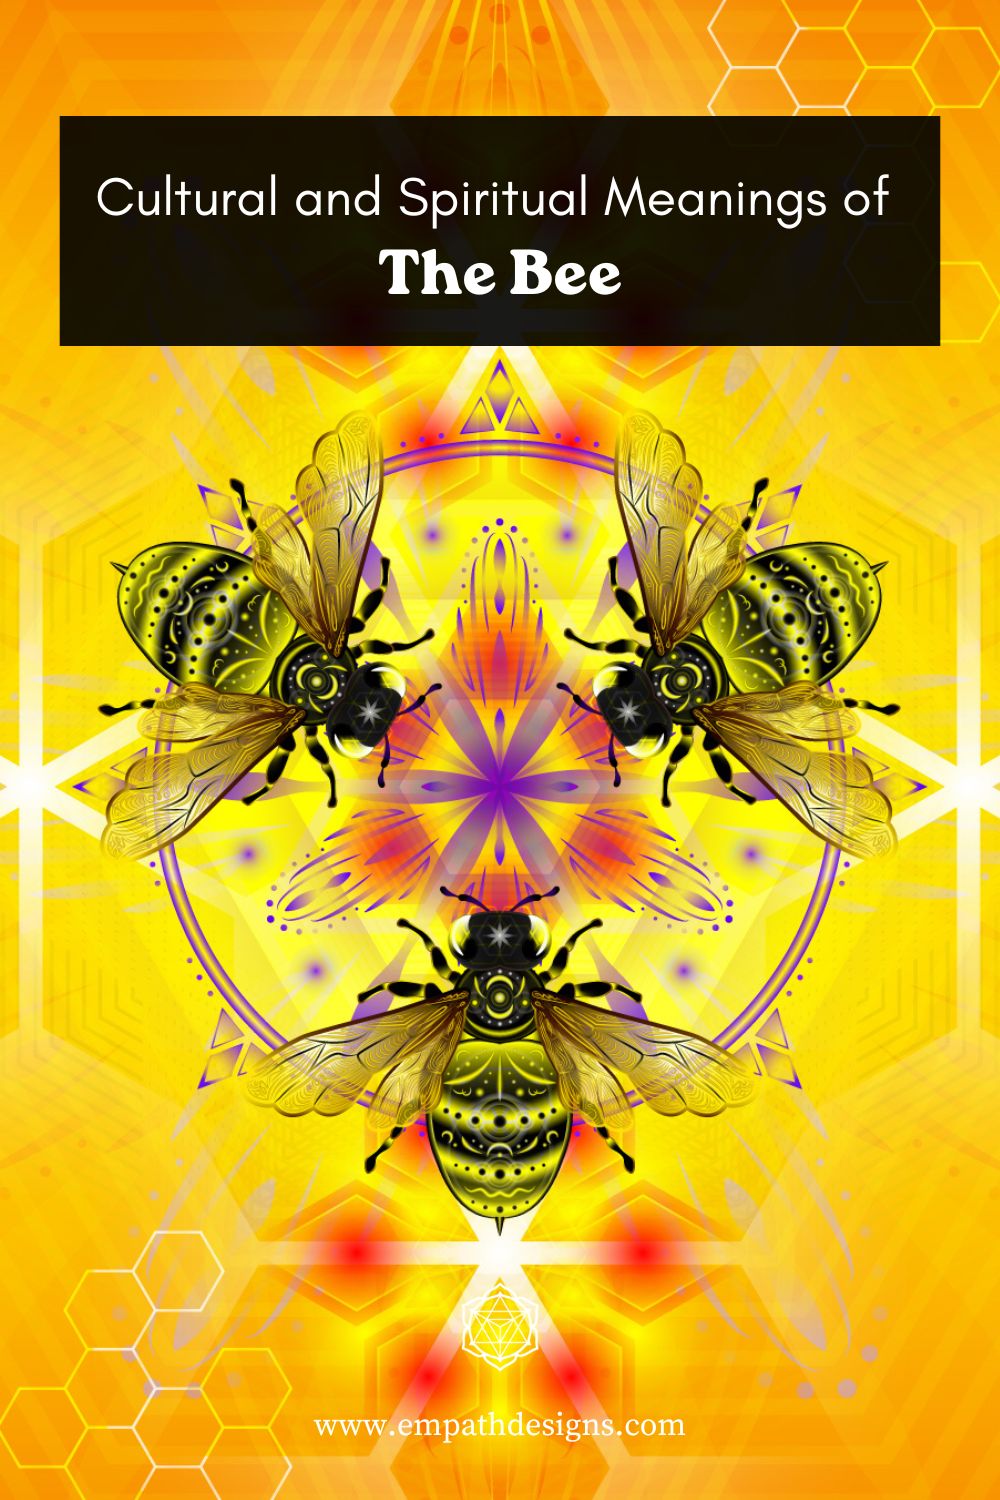 The Cultural and Spiritual Meanings of the Bee